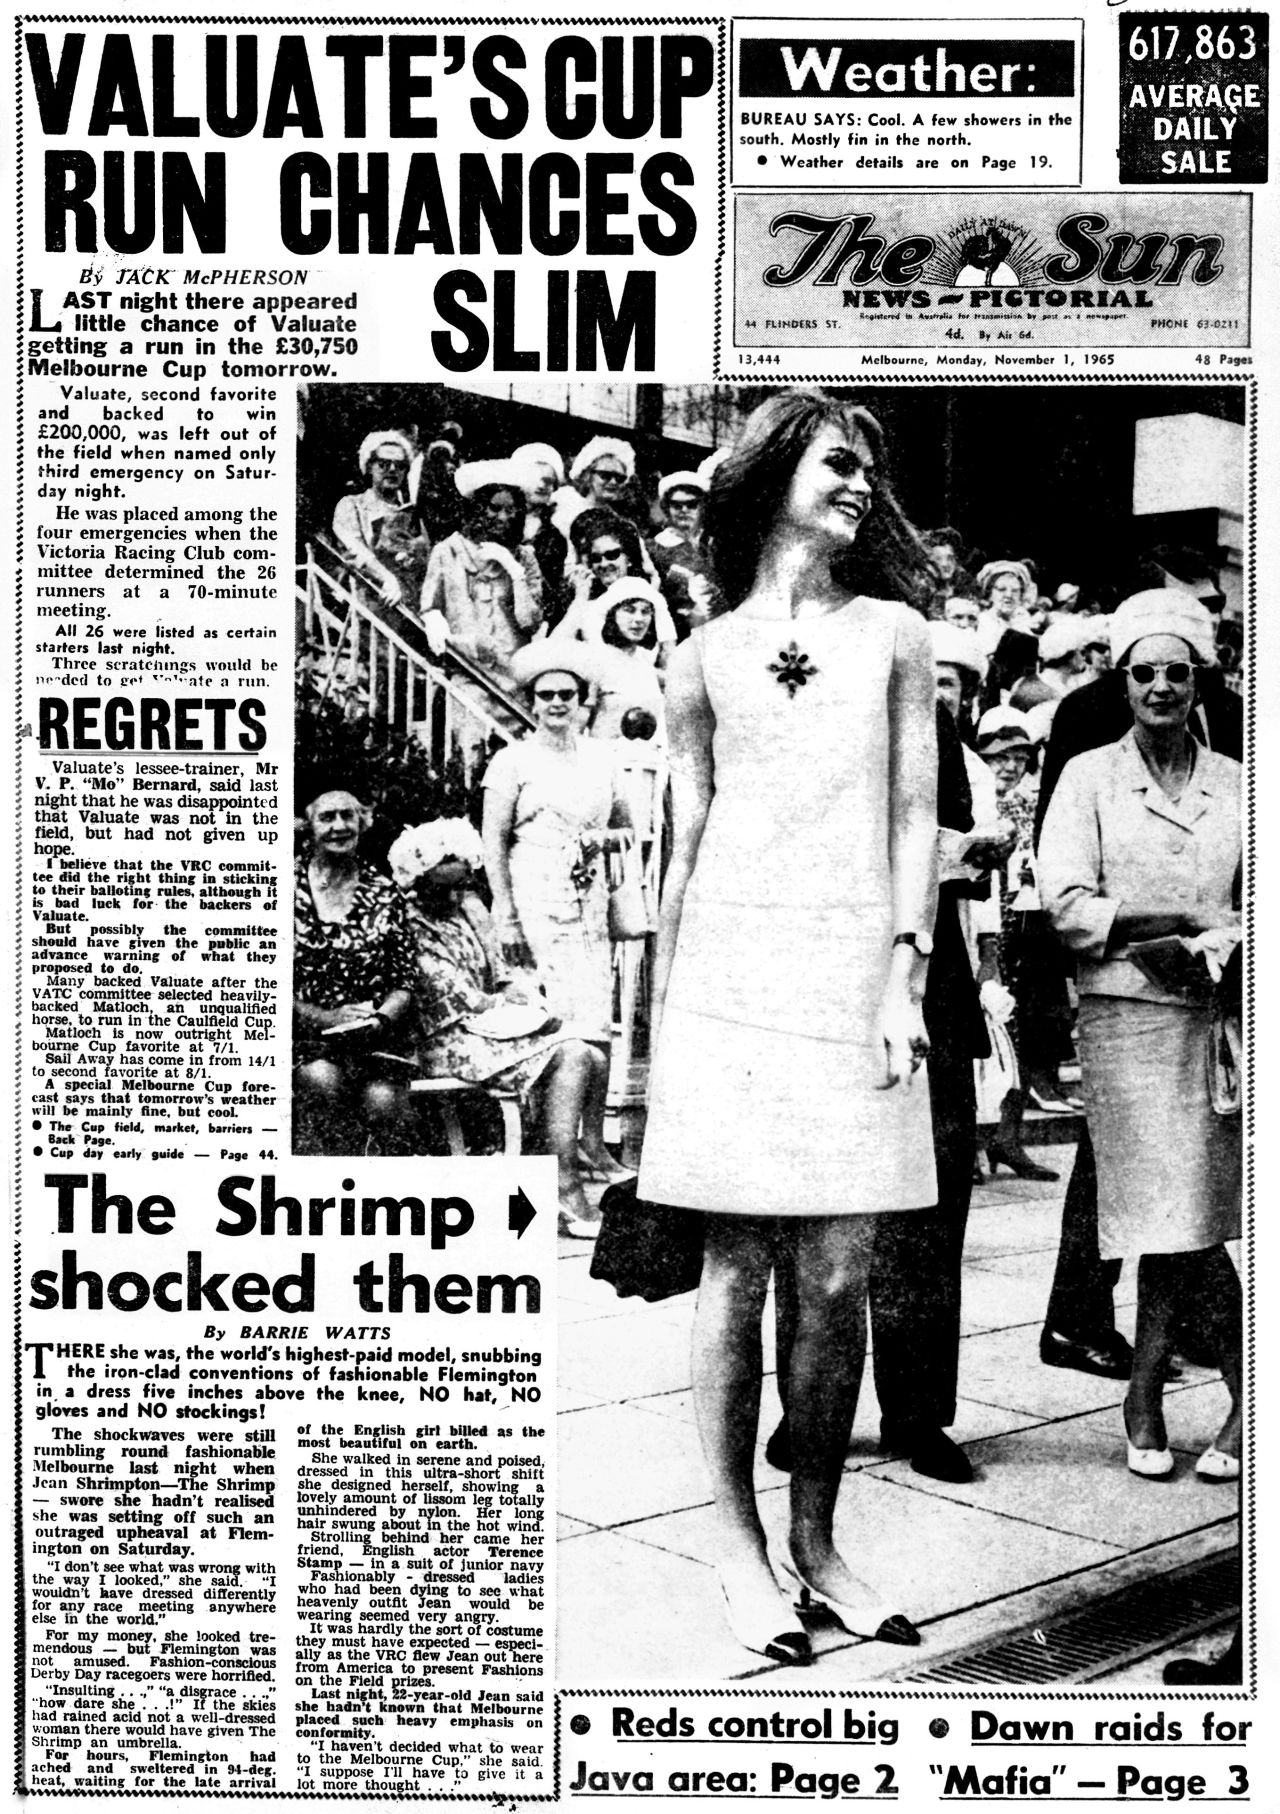 For the first time since the inaugural race in 1861, the winning horse was knocked off newspaper front pages in favour of Shrimpton's legs.